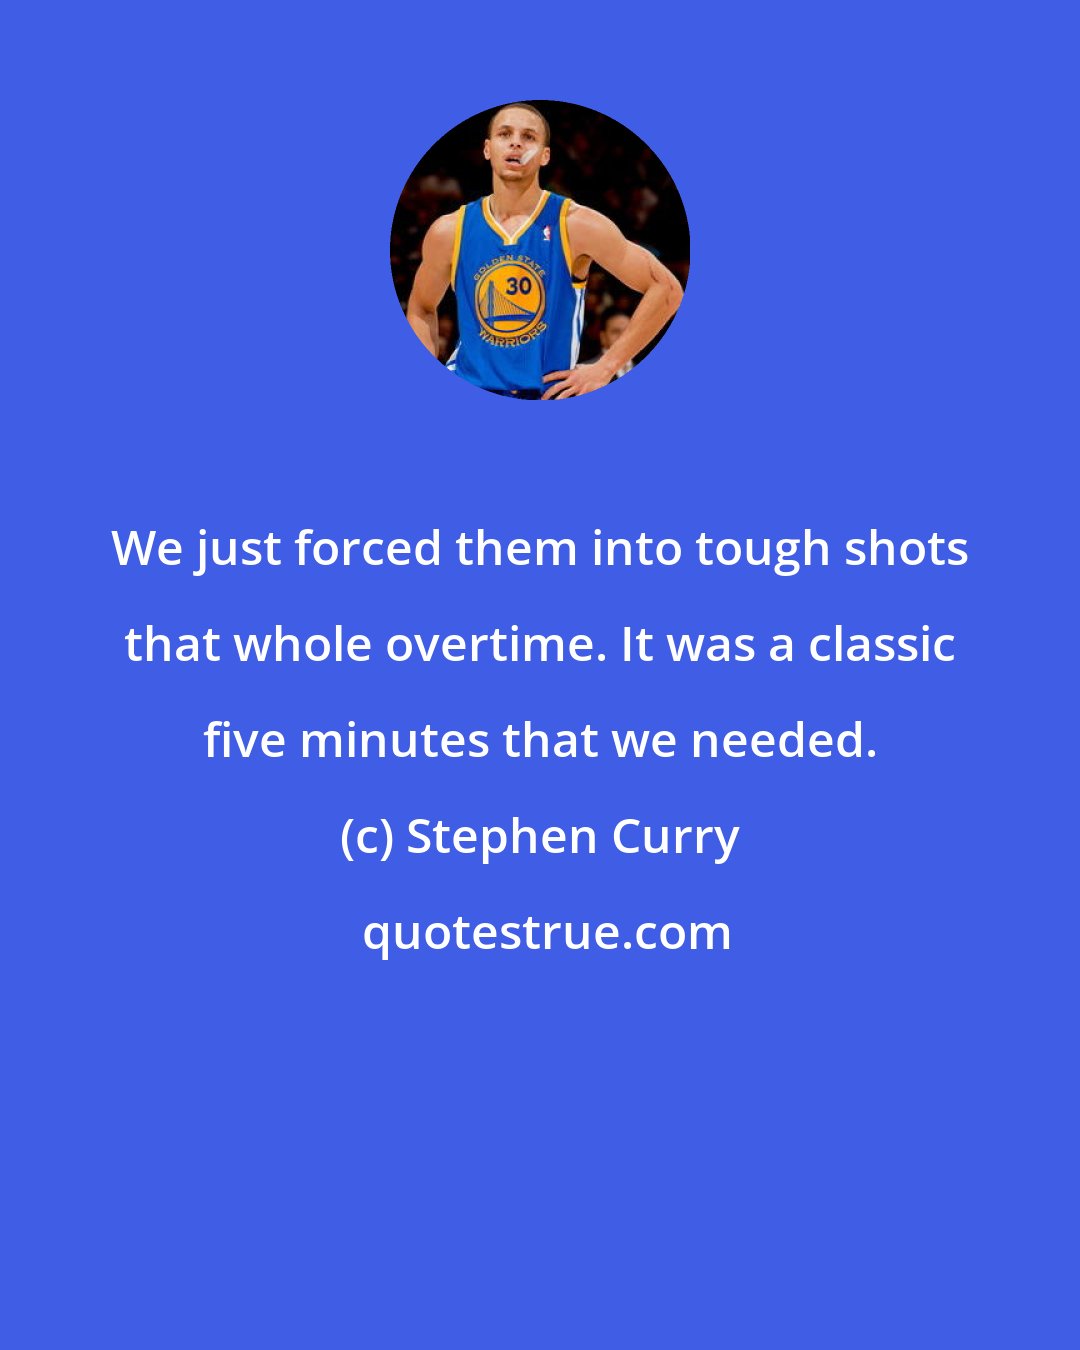 Stephen Curry: We just forced them into tough shots that whole overtime. It was a classic five minutes that we needed.